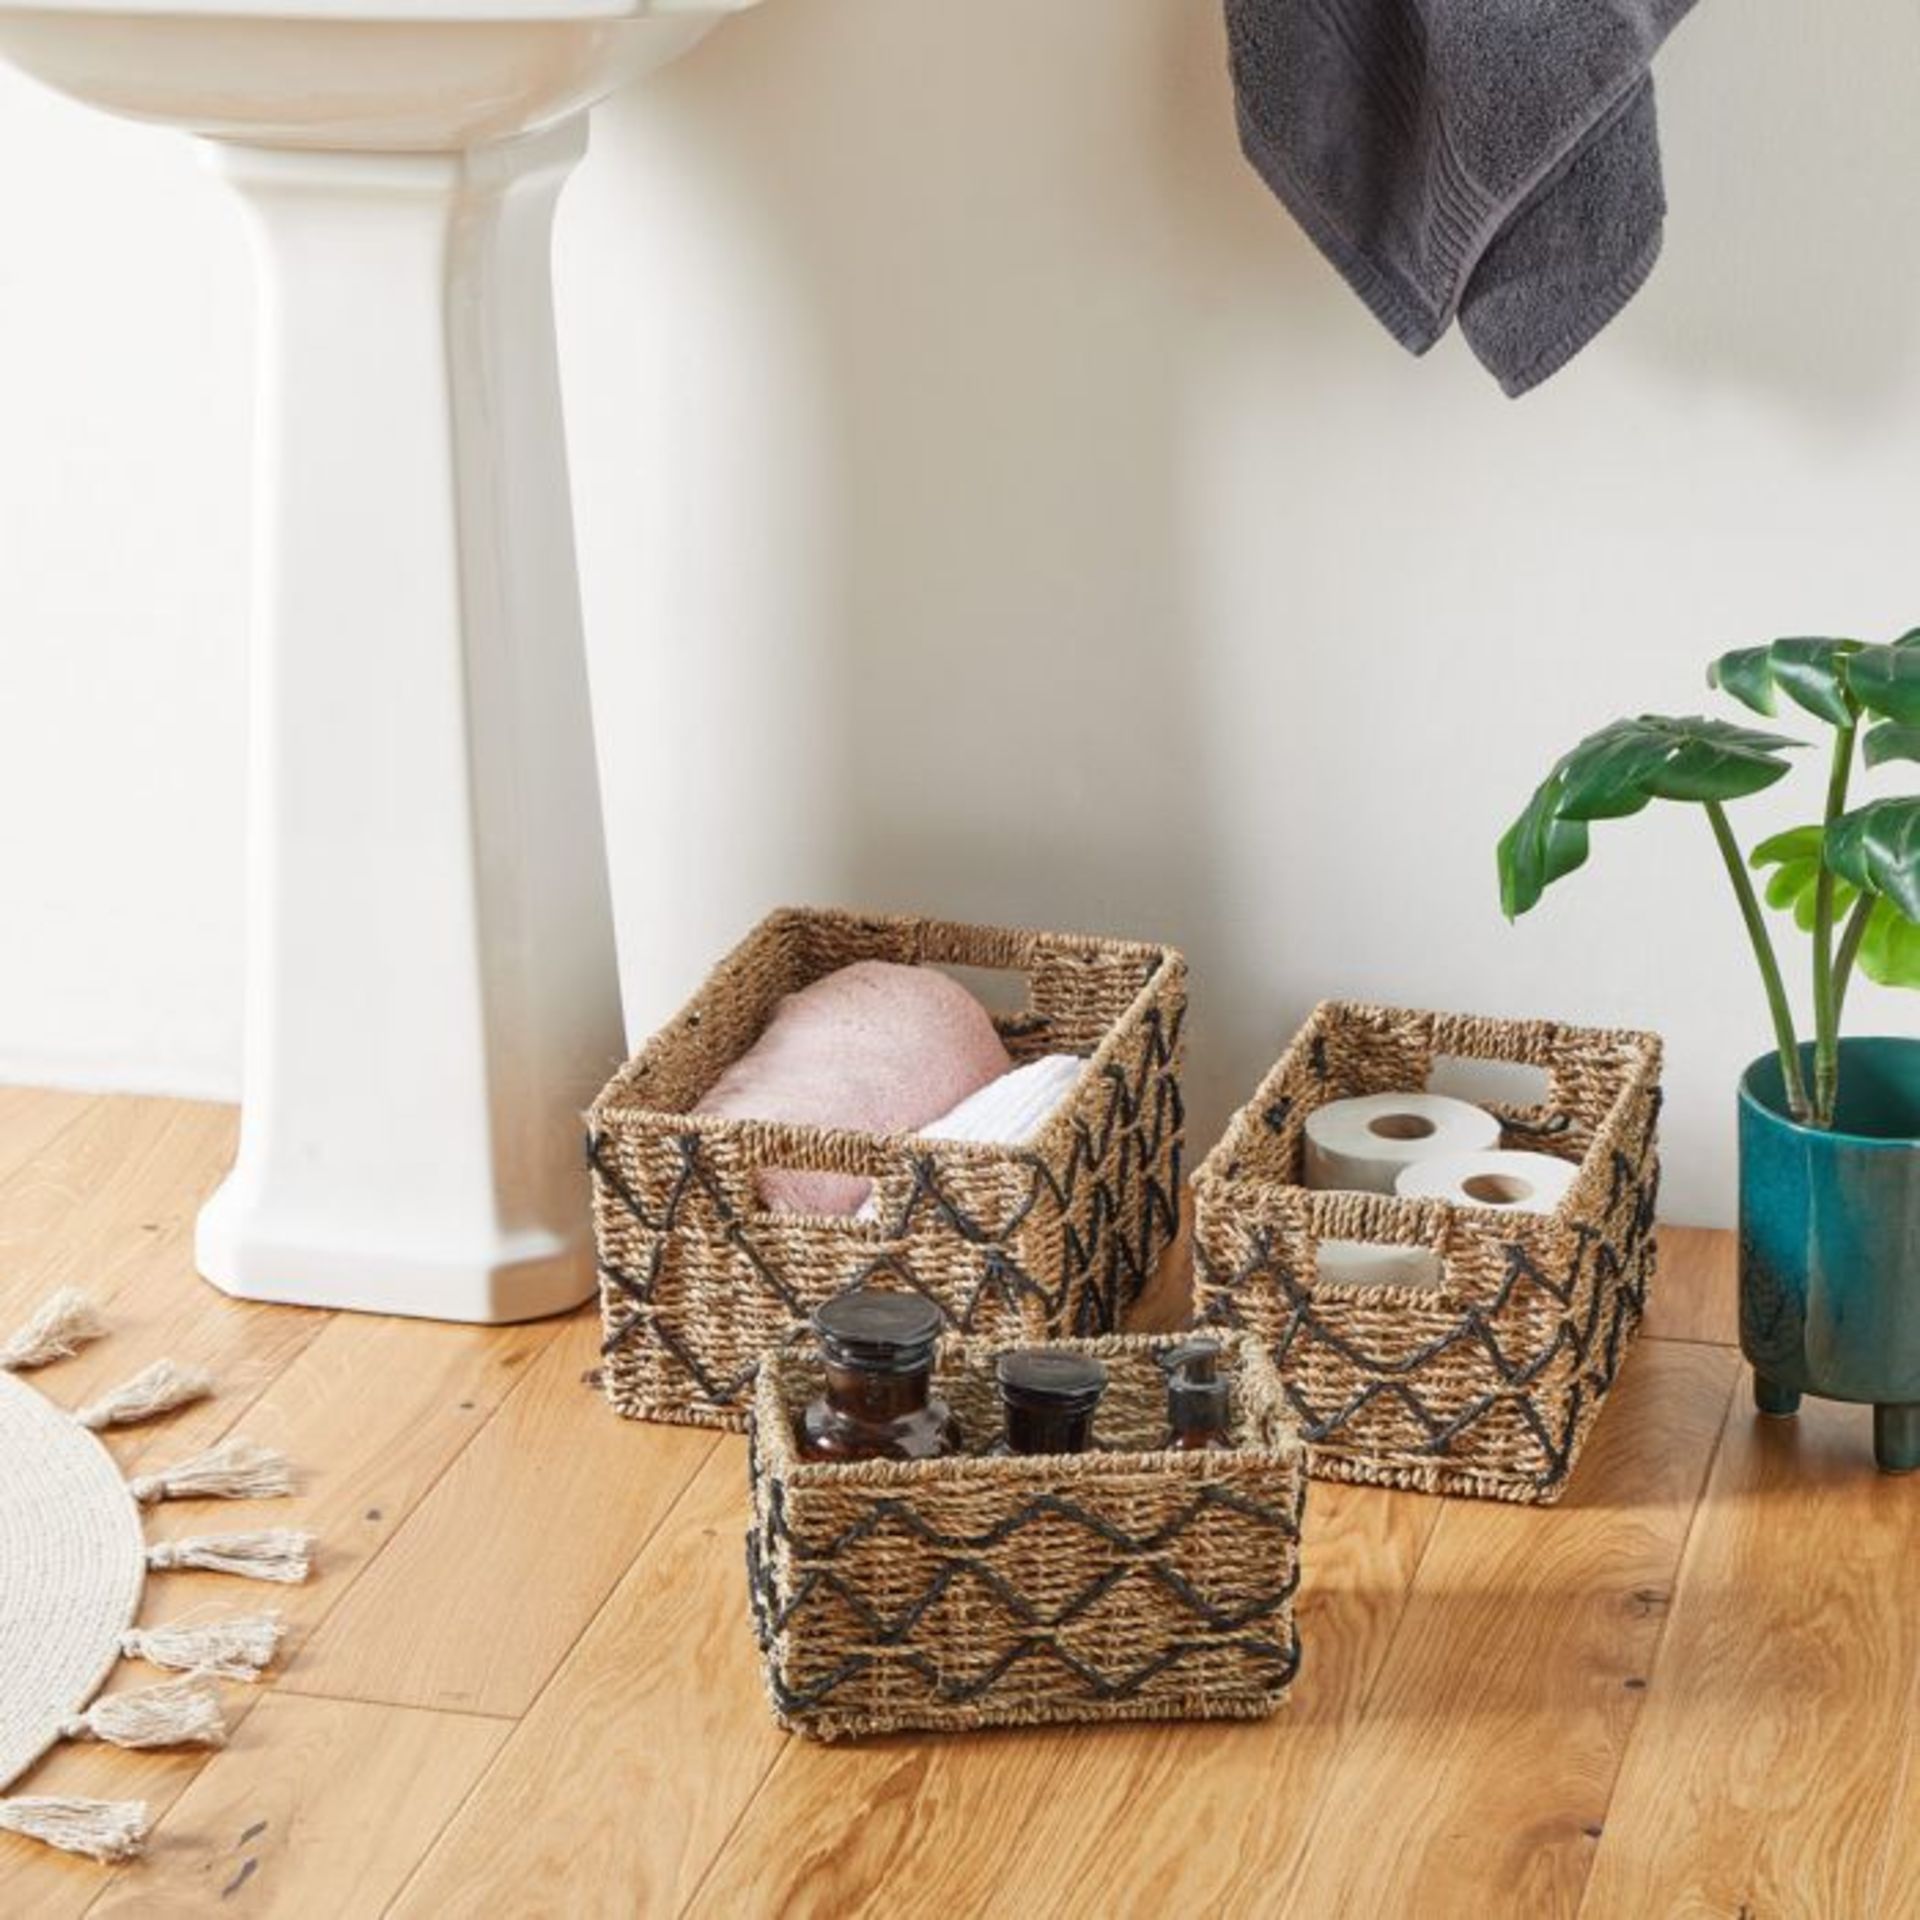 Patterned Set of 3 Seagrass Baskets. Use our Patterned Set of 3 Seagrass Baskets to display or